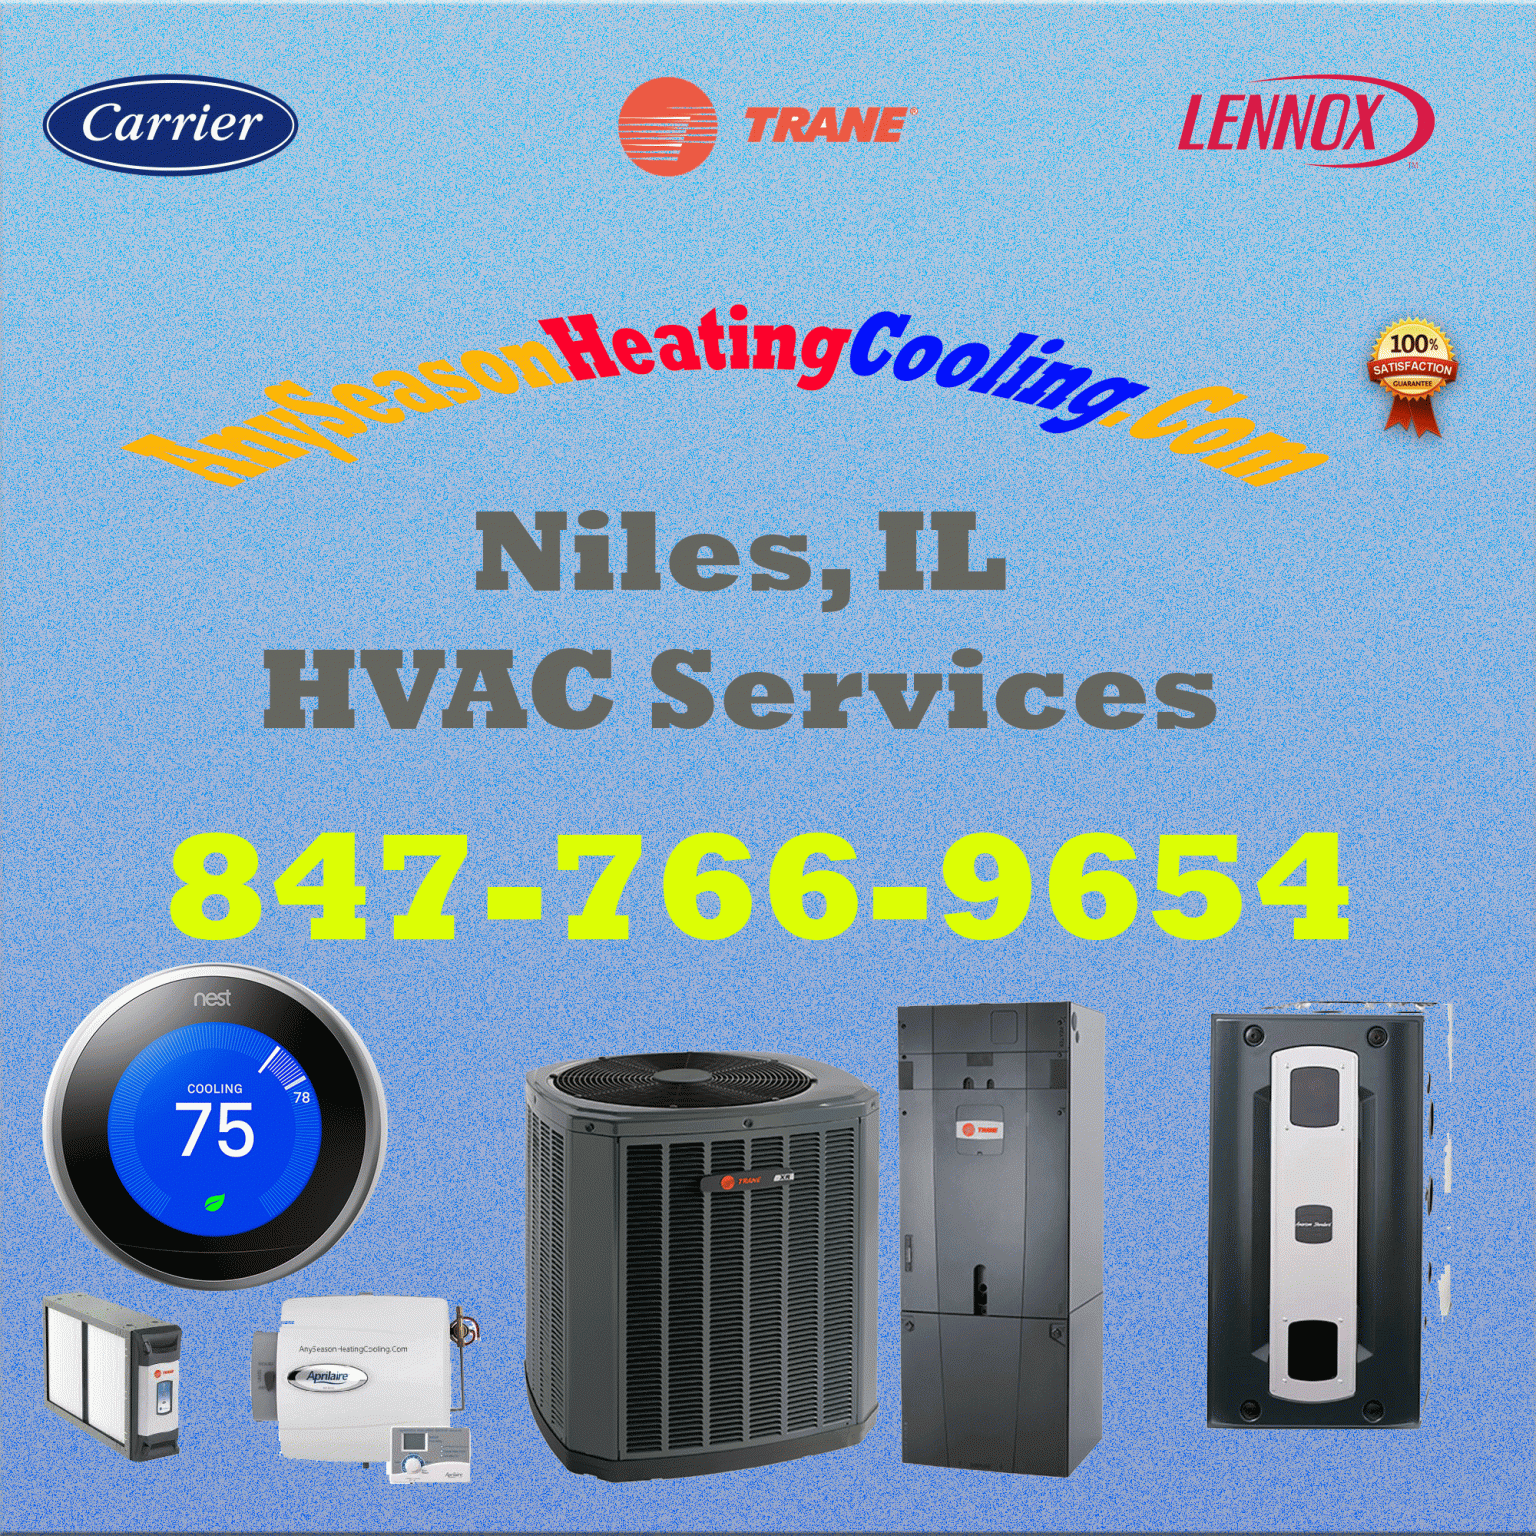 Niles IL Furnace Replacement for Less